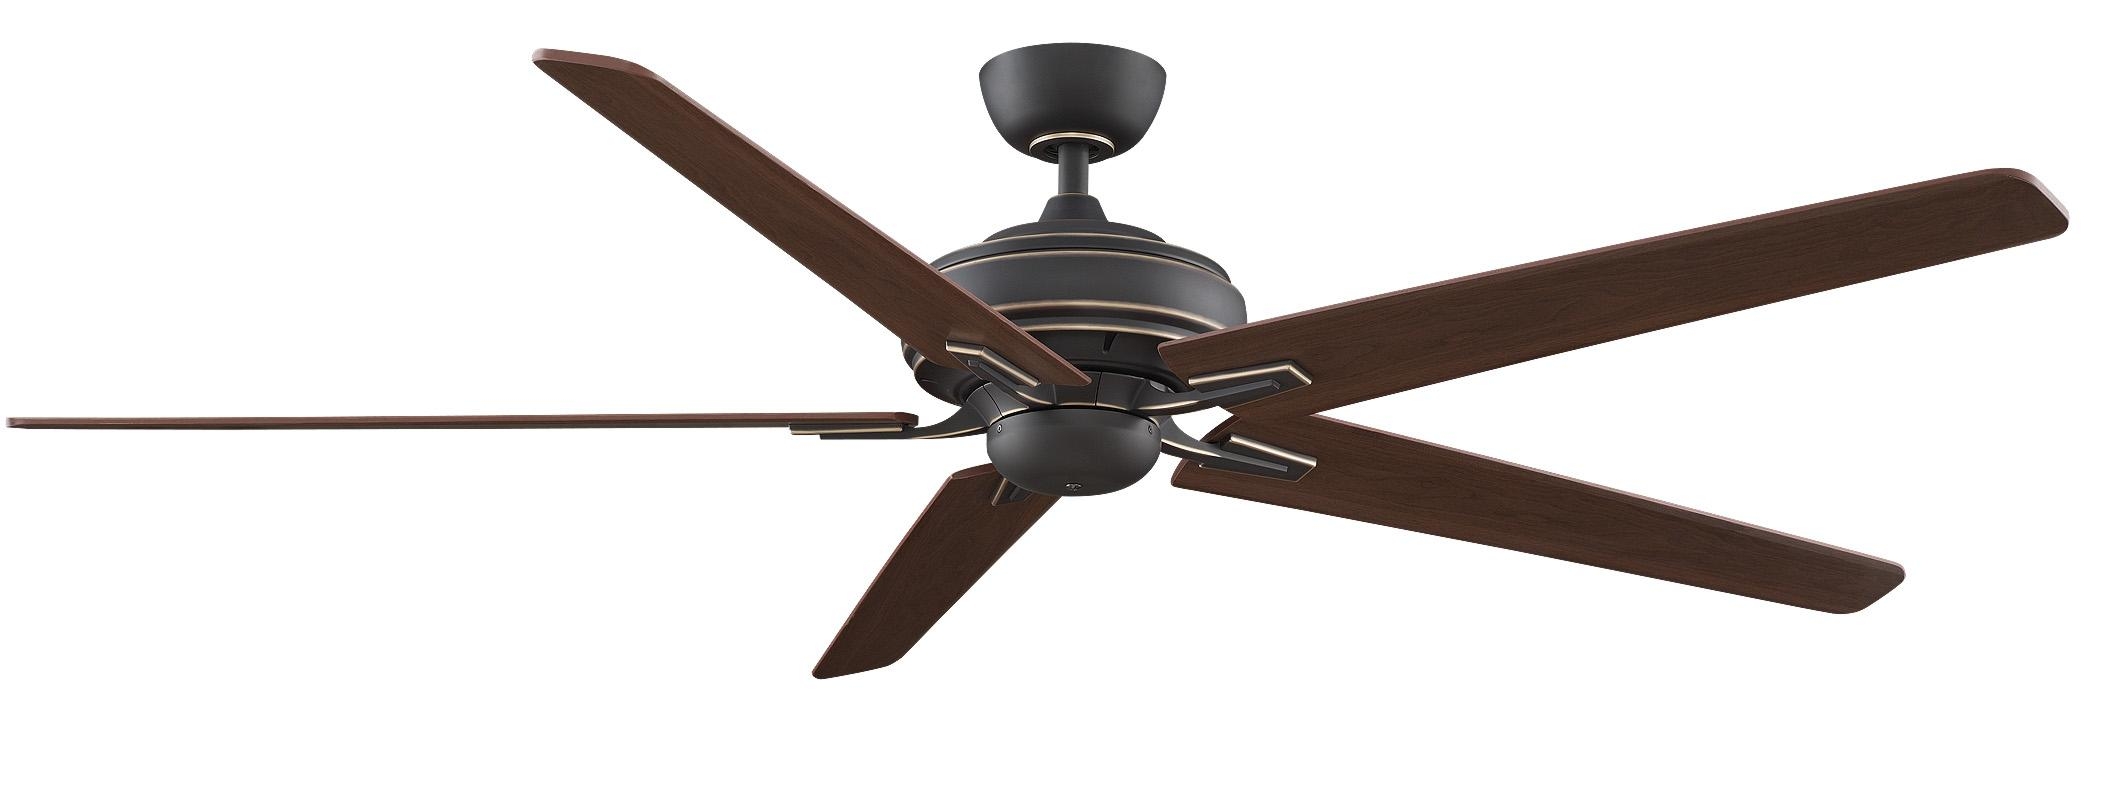 Permalink to Best Outdoor Ceiling Fans Without Lights